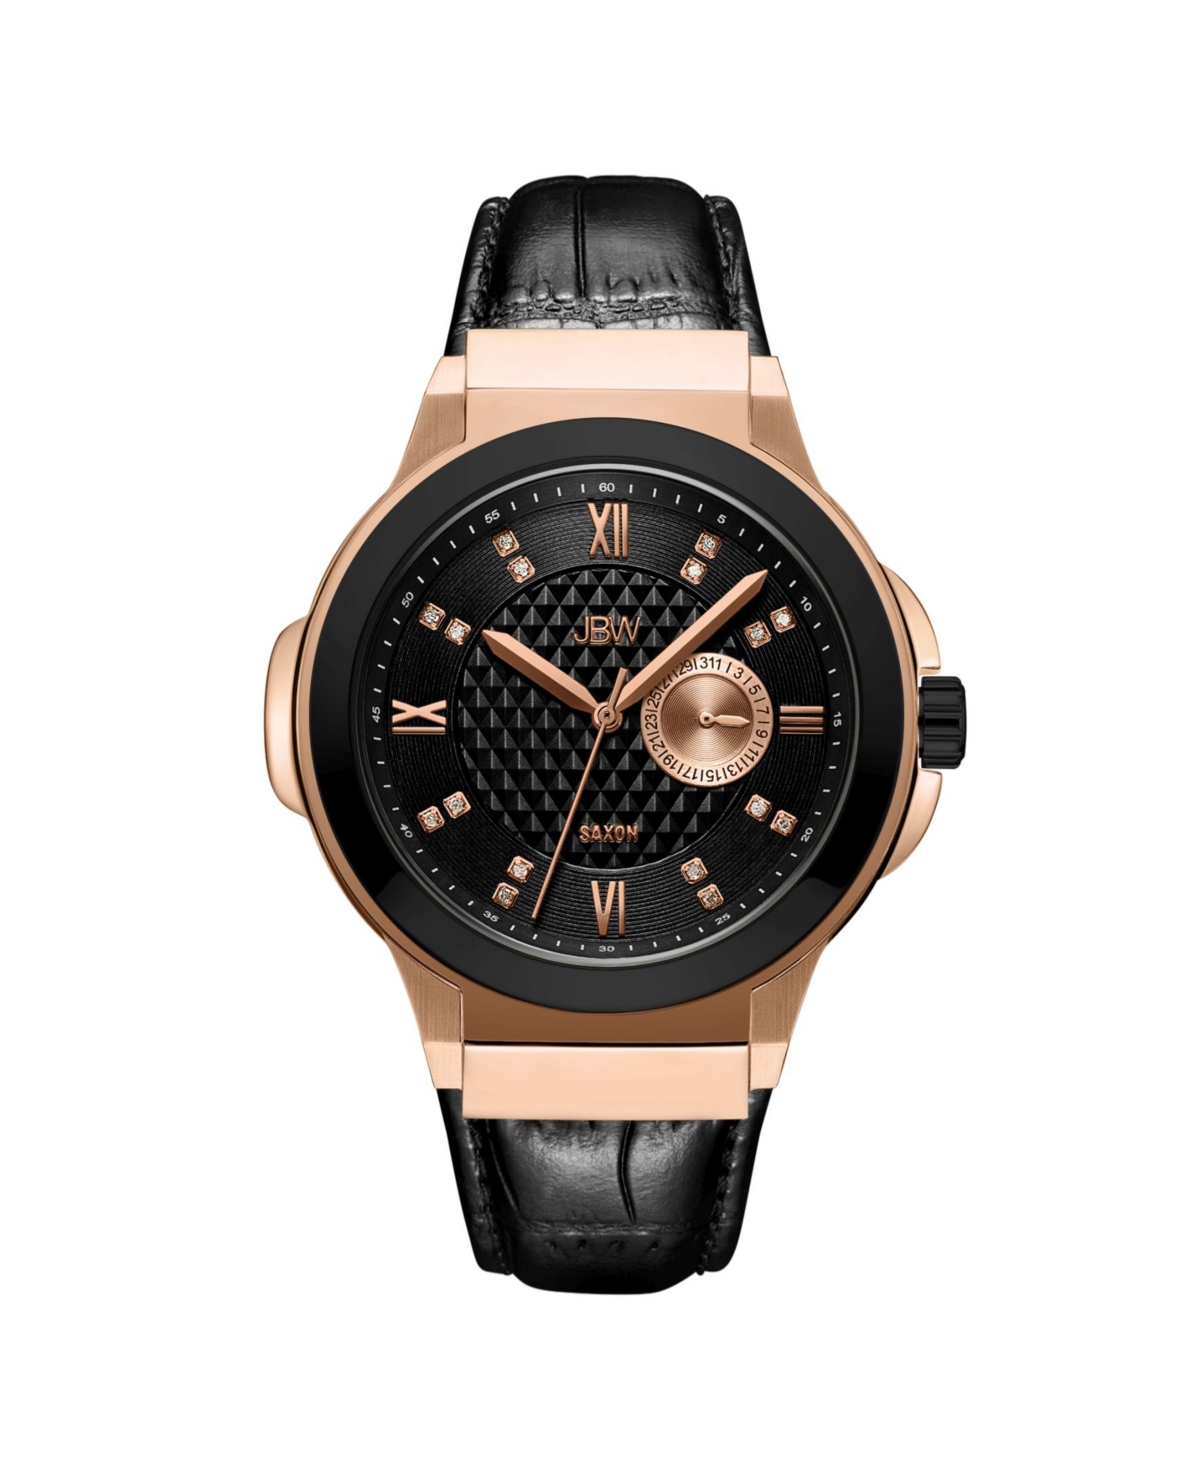 Men's Saxon Diamond (1/6 ct. t.w.) Watch in 18k Two Tone Rose Gold-plated Black Stainless Steel Watch 48mm - Black